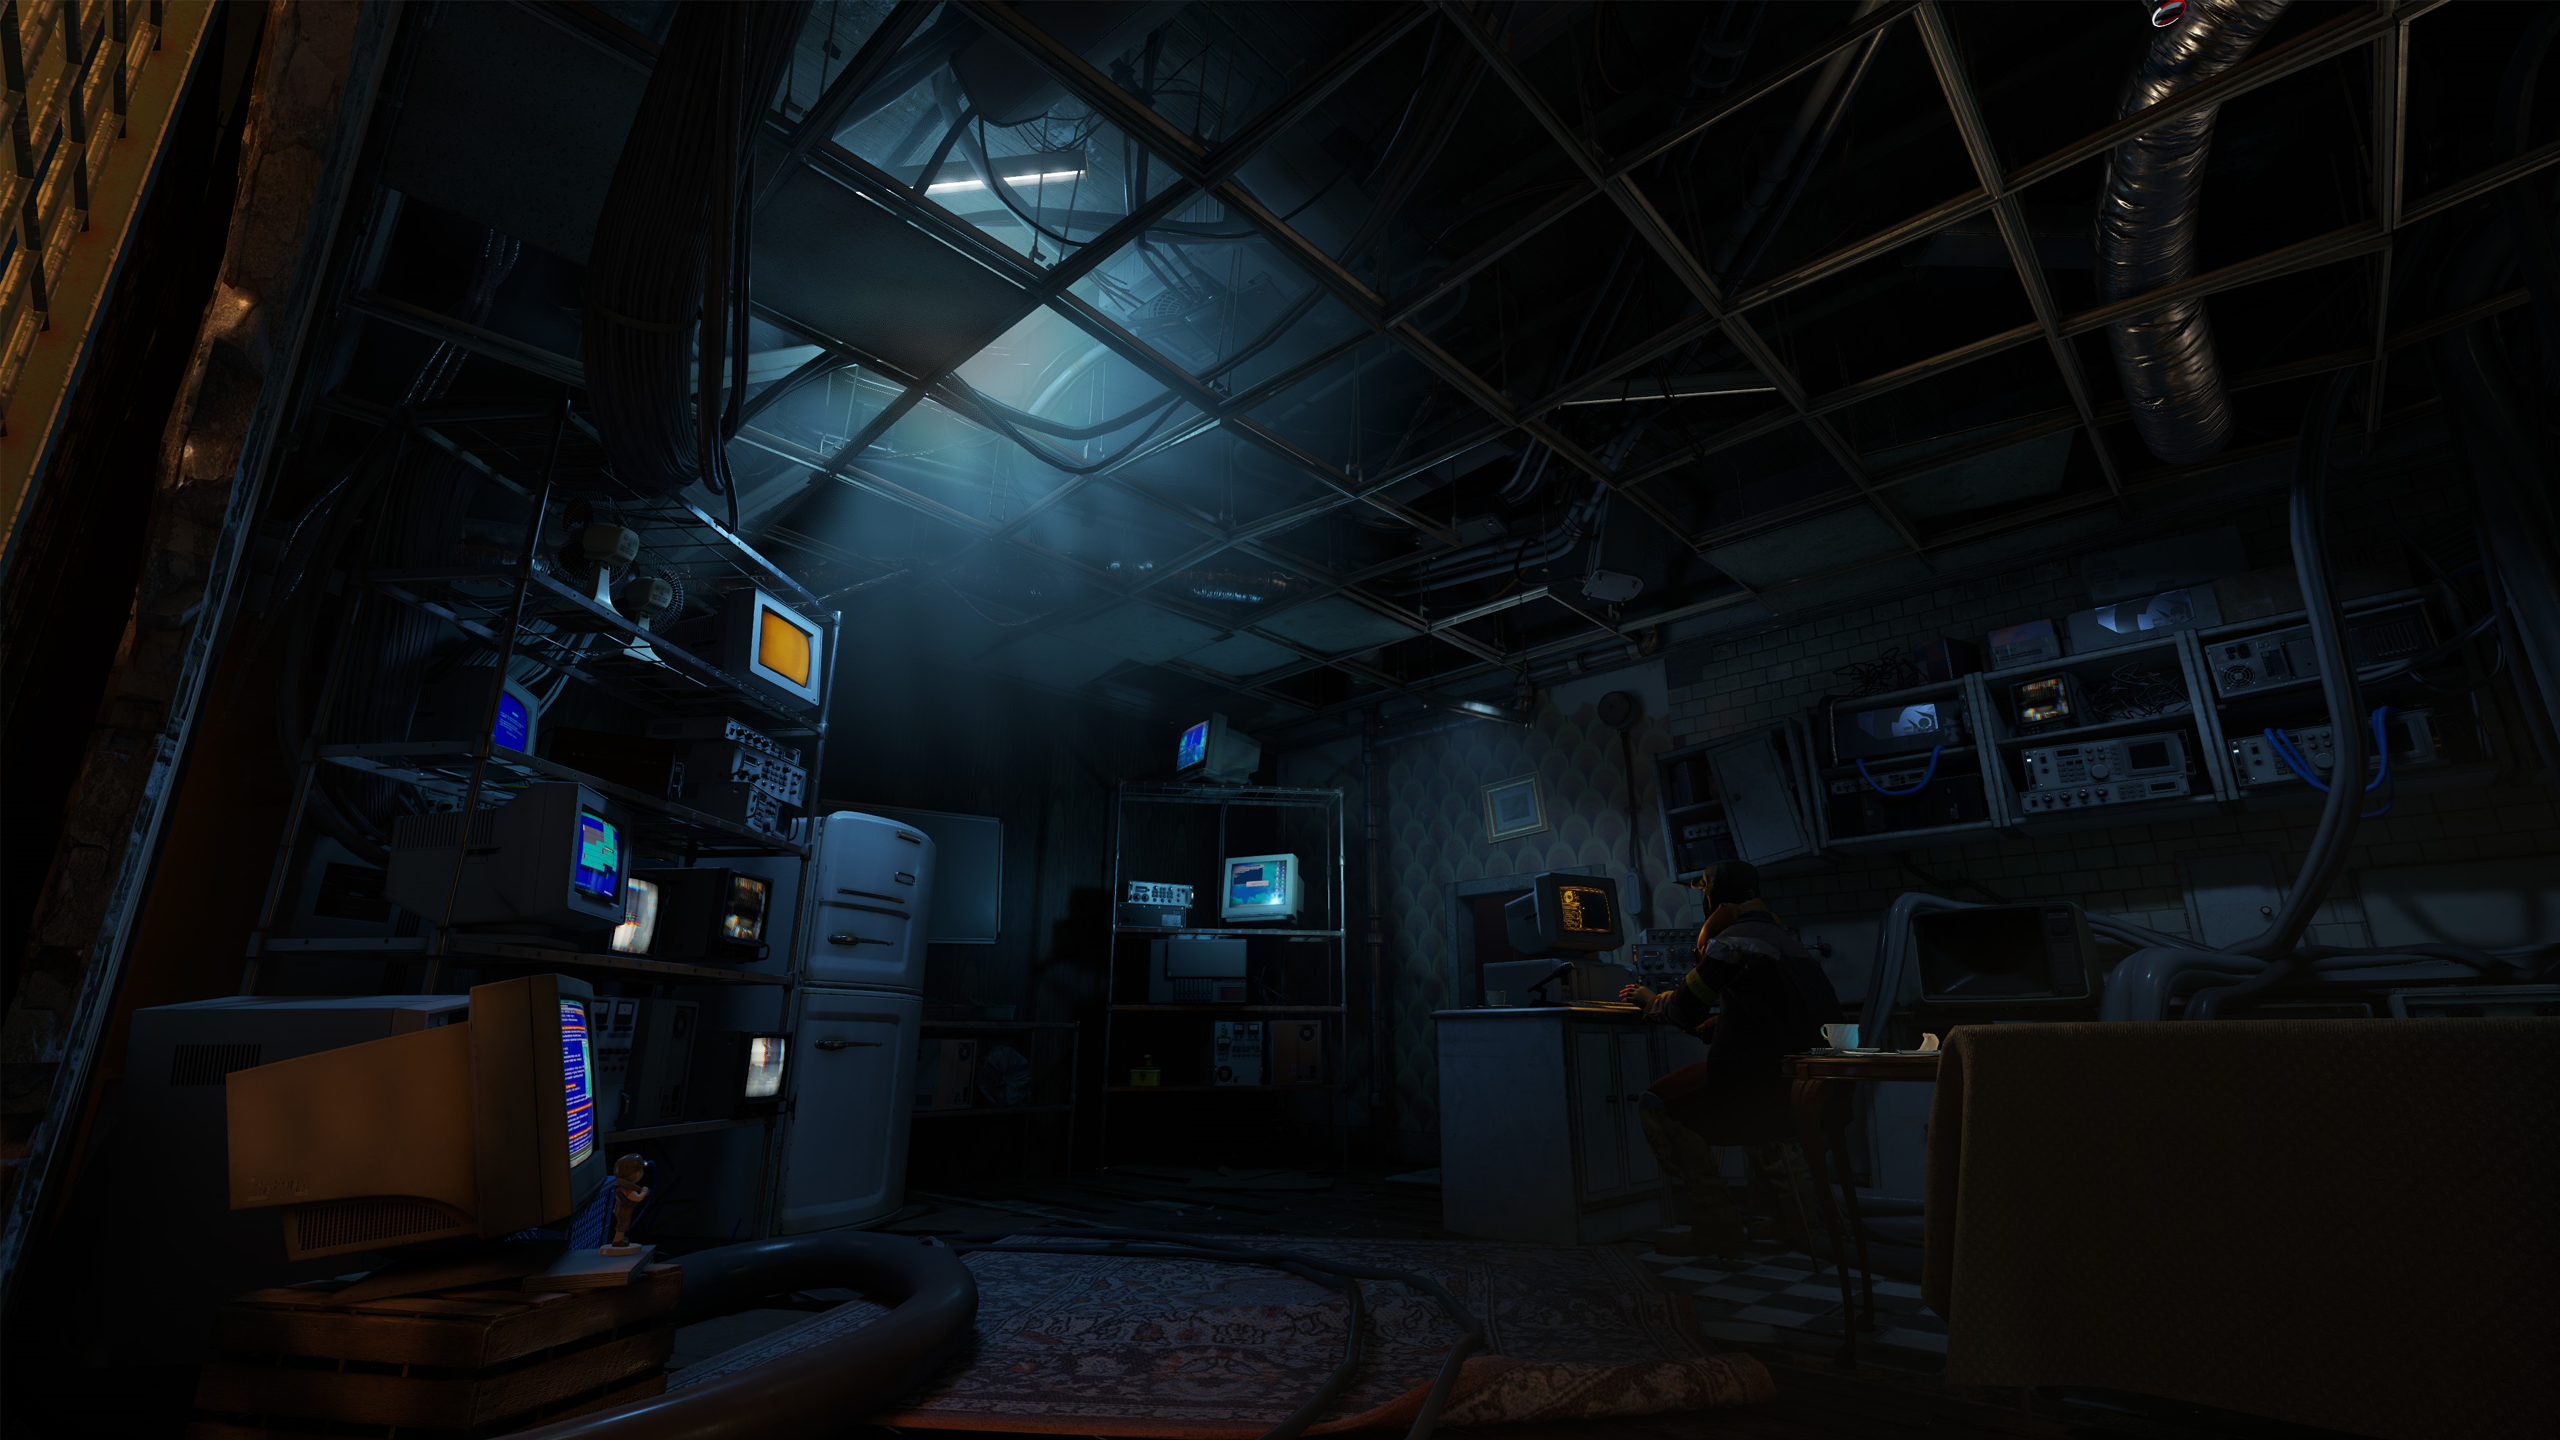 Image for Half-Life: Alyx was conceived as a VR title first, and a Half-Life game second